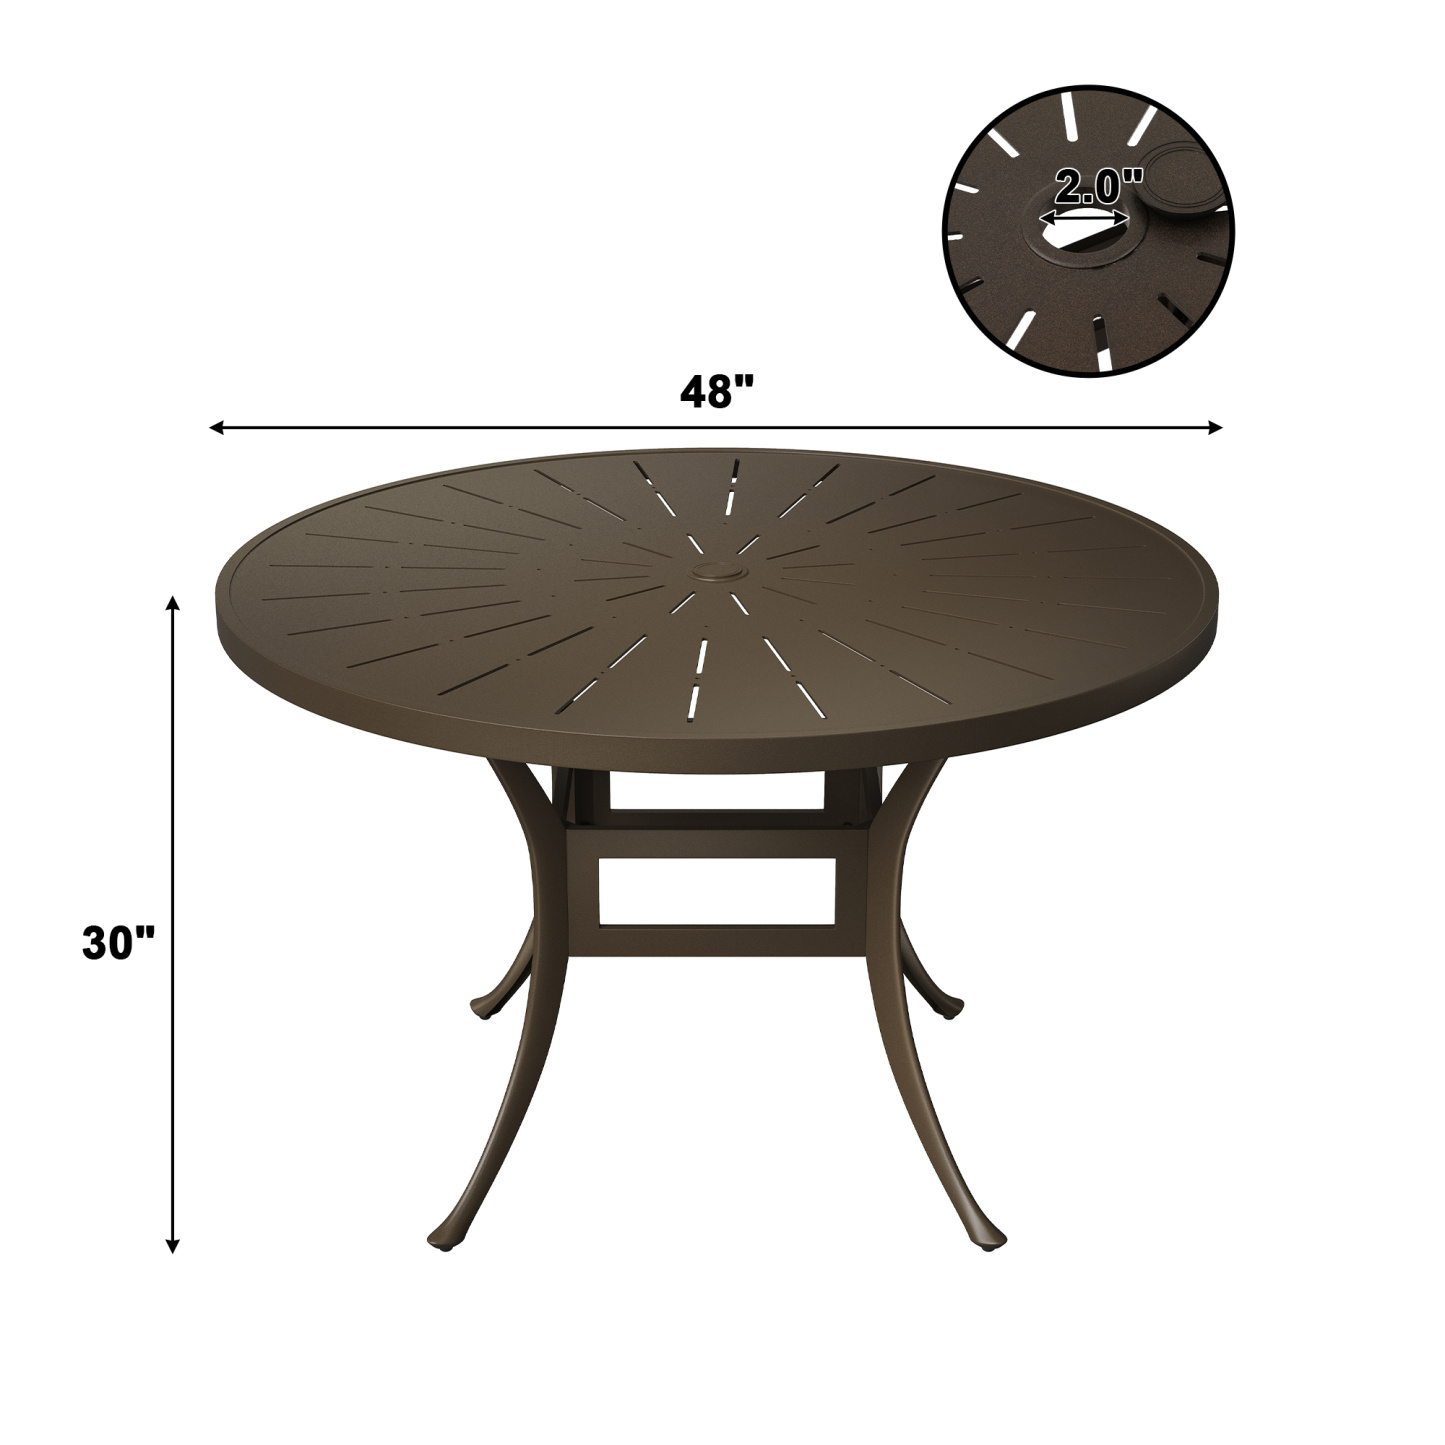 48 Inch Patio Dining Table with Umbrella Hole Cast Aluminum Frame Smooth Table Top Outdoor Table for Yard